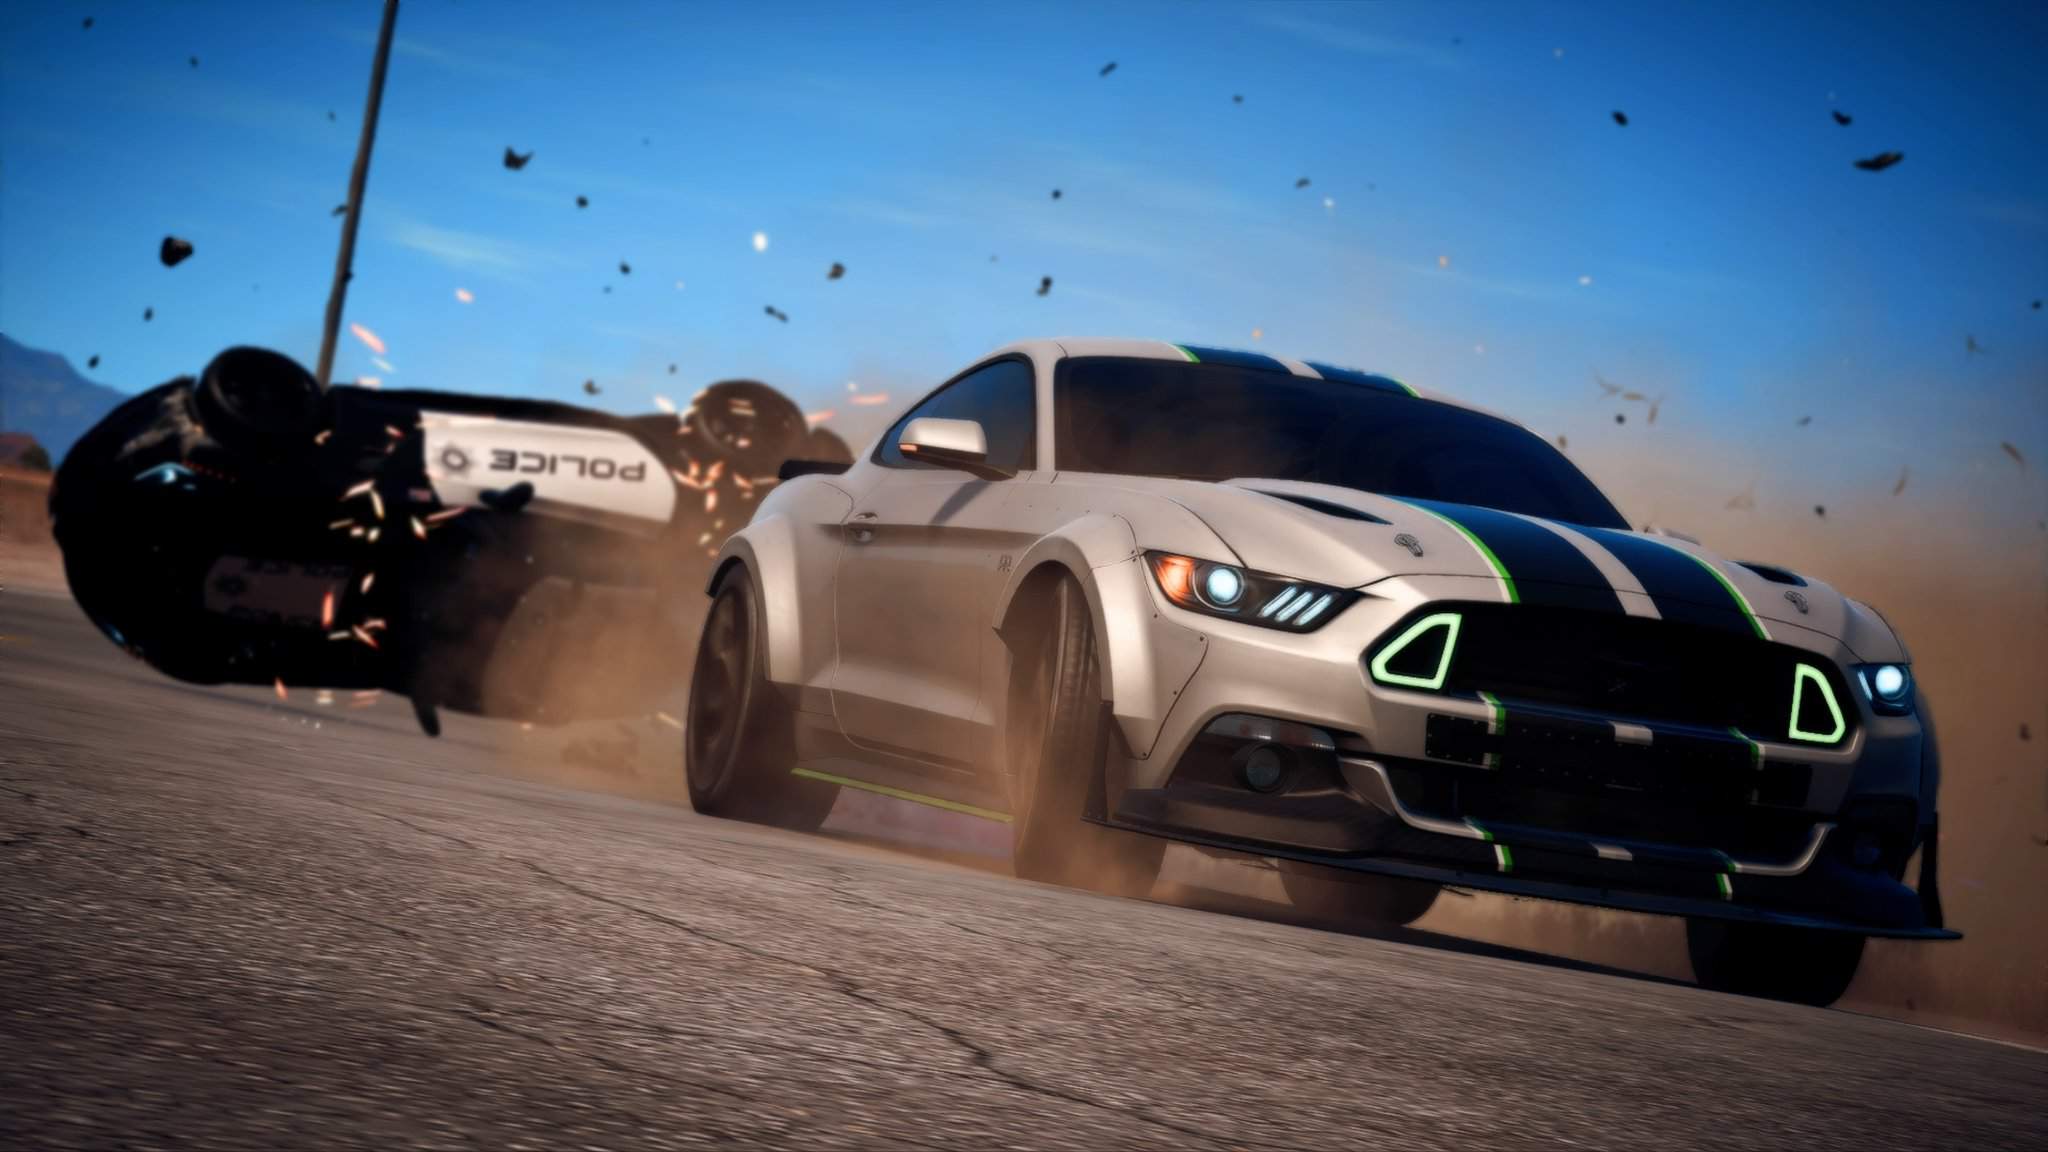 Мустанг payback. NFS Payback Mustang. Need for Speed Payback обои 1366 x 768. Loading Screen in Race game. Loading Screen of Racing game.